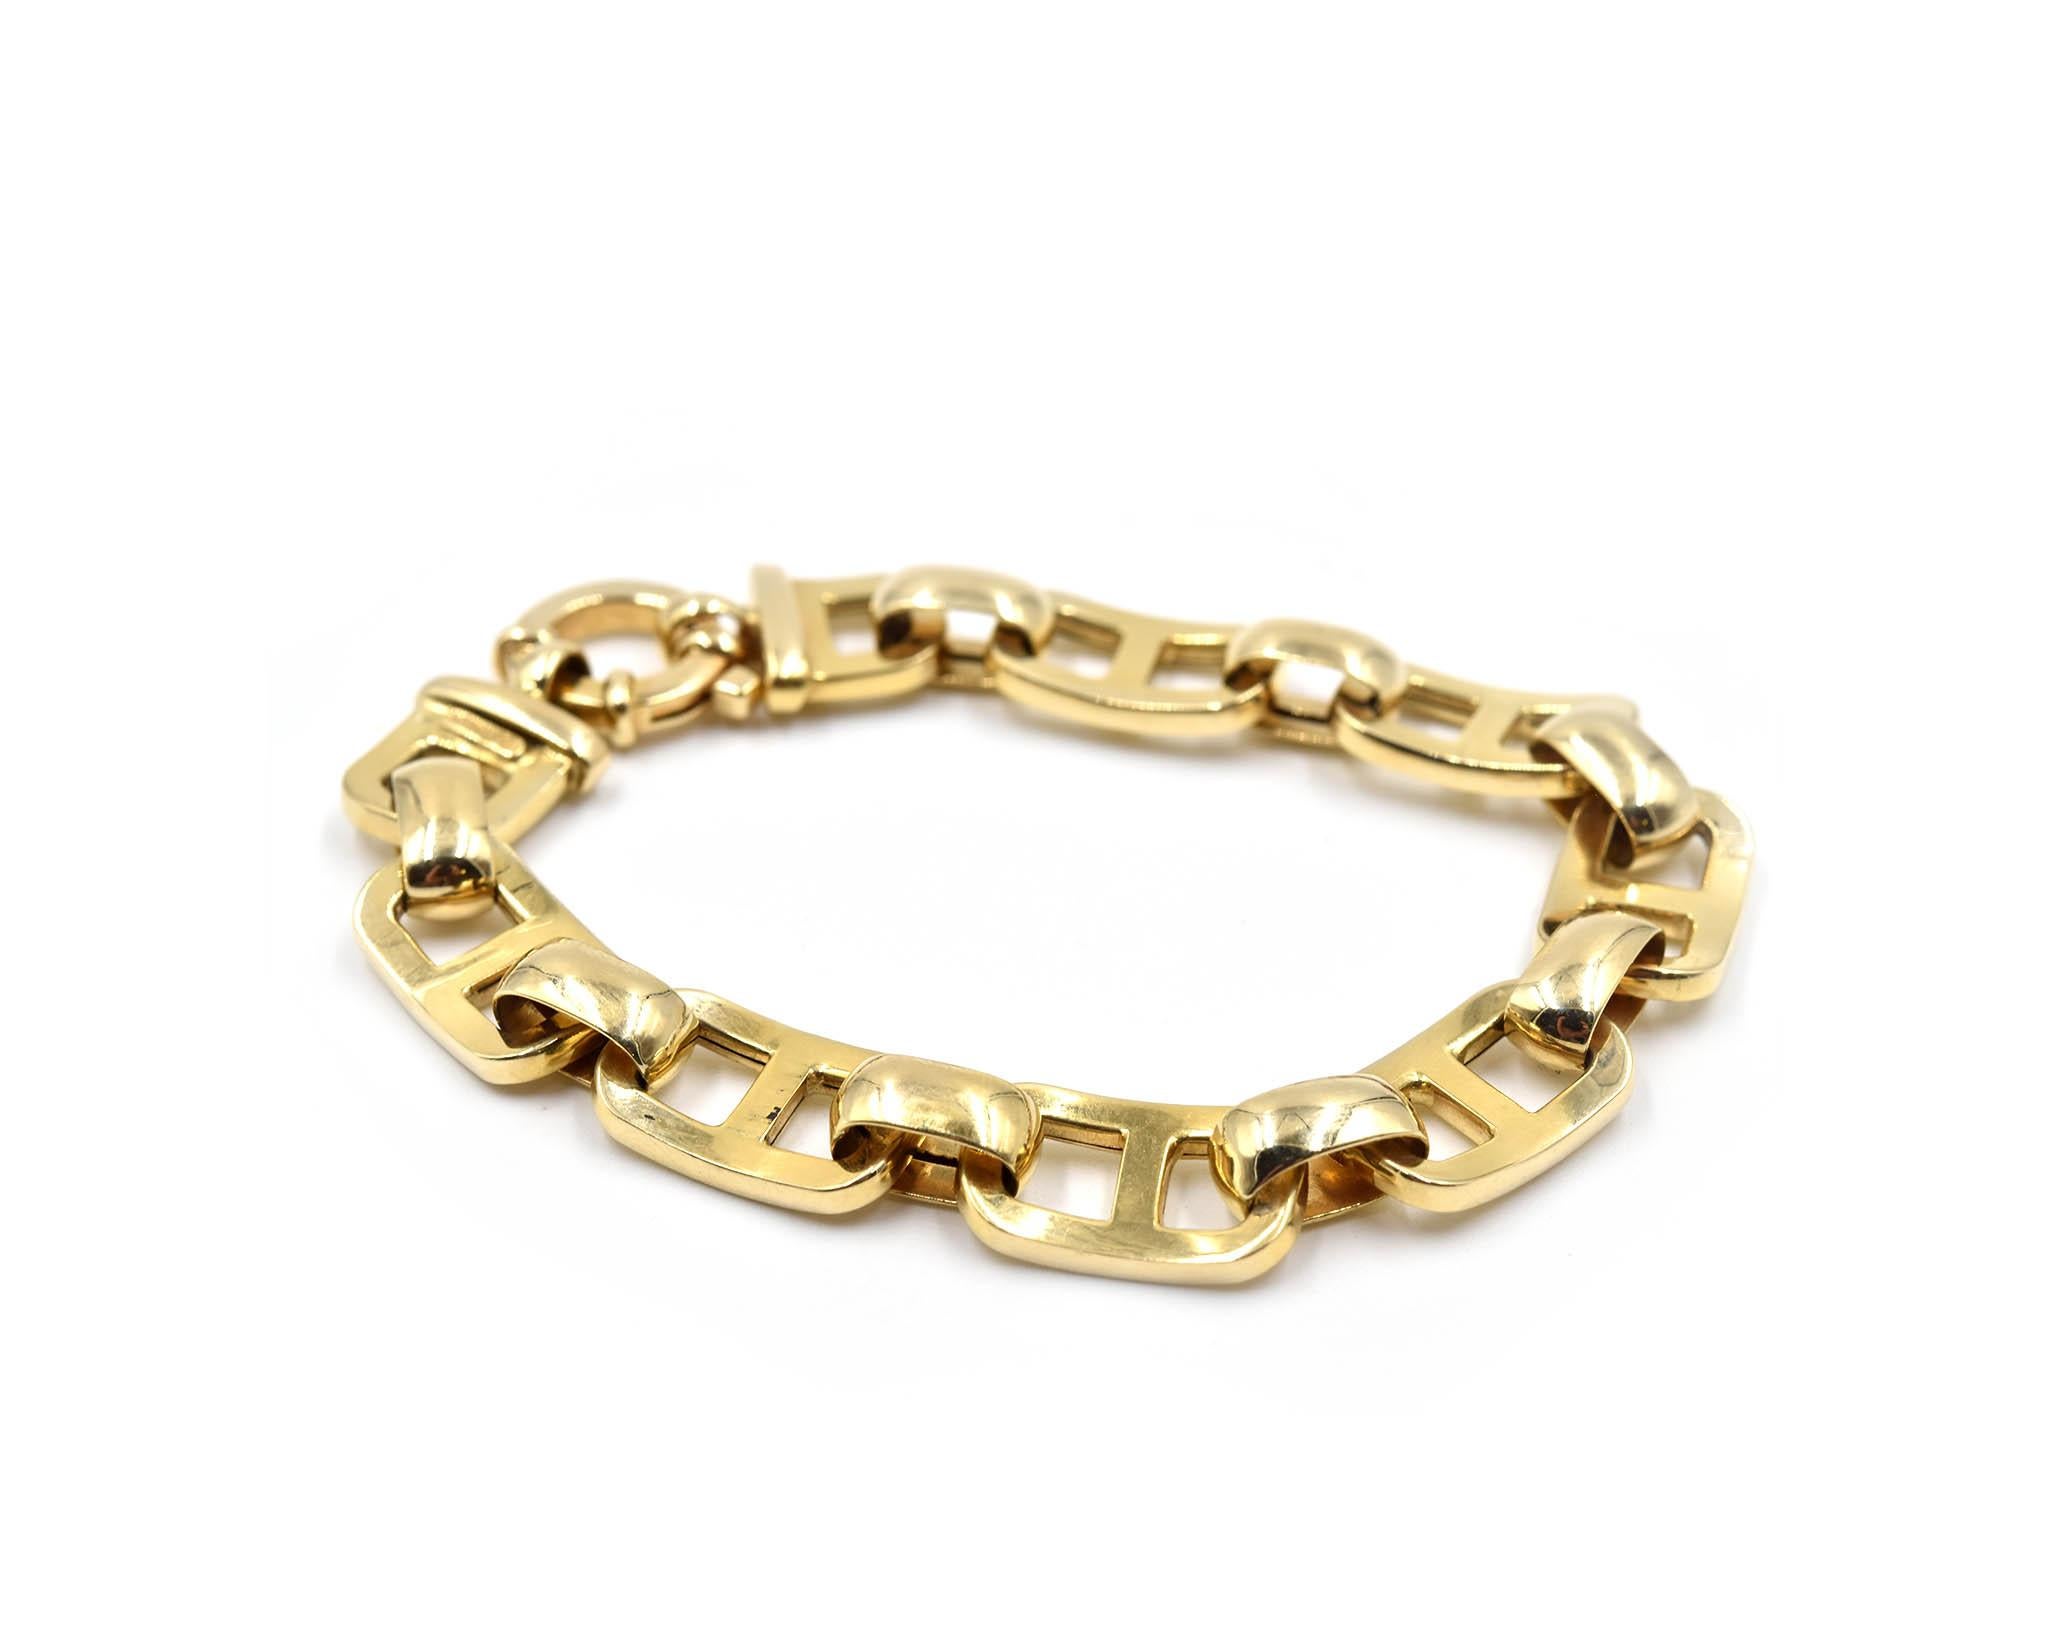 Designer: custom design
Material: 14k yellow gold
Dimensions: bracelet is 7-inch long x 3/8-inch wide
Weight: 16.1 grams
